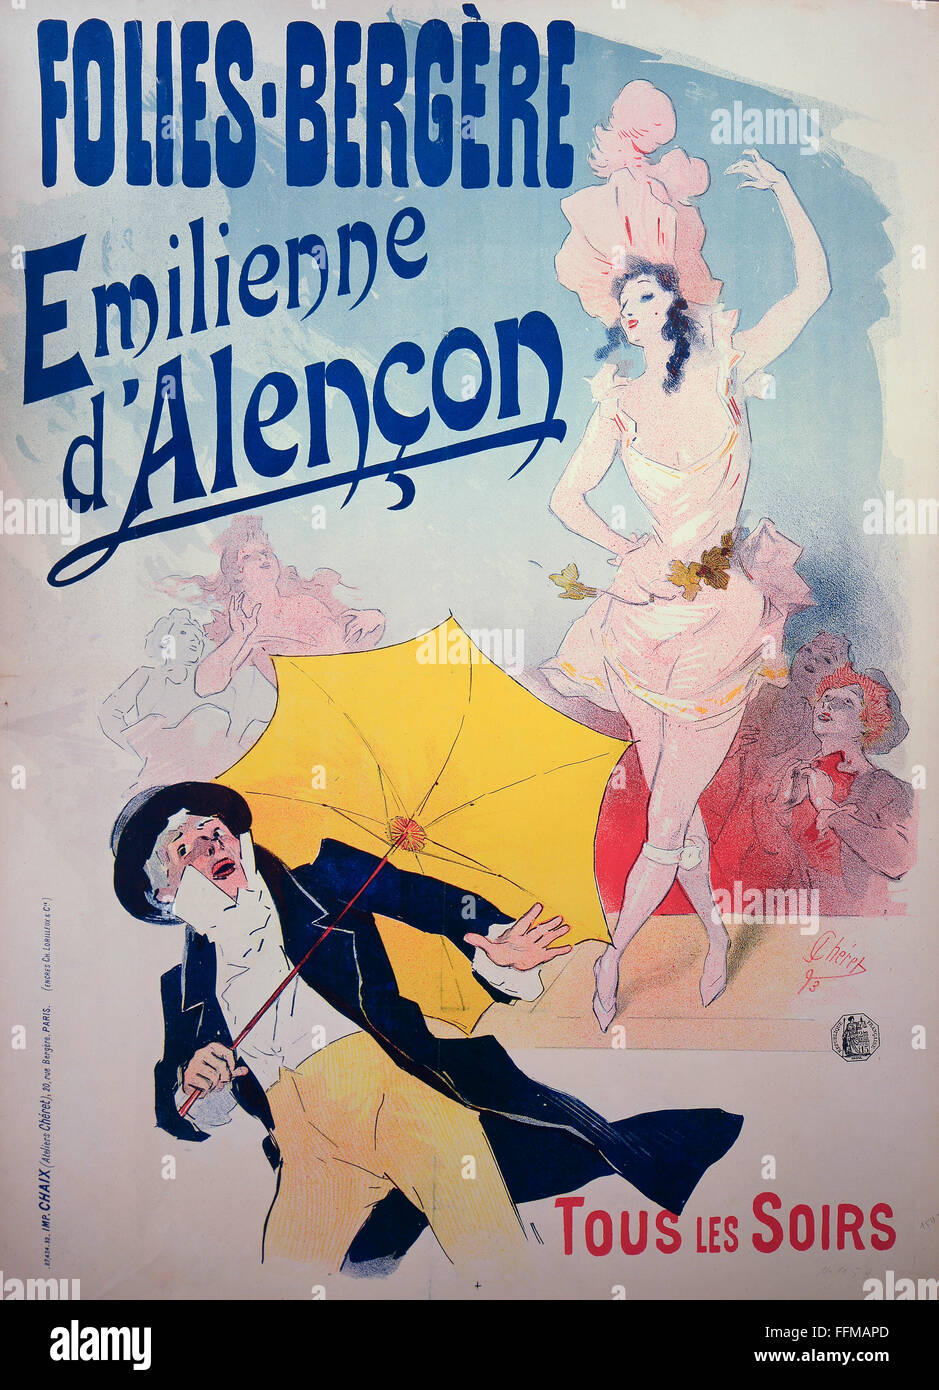 posters, advertising poster for the music hall 'Folies Bergere' in Paris with the dancer Emilienne d'Alencon performing there every night, colour lithograph by Jules Cheret (1836 - 1932), 1893, 83 x 59.5 cm, Die Neue Sammlung (The New Collection), Munich, Additional-Rights-Clearences-Not Available Stock Photo